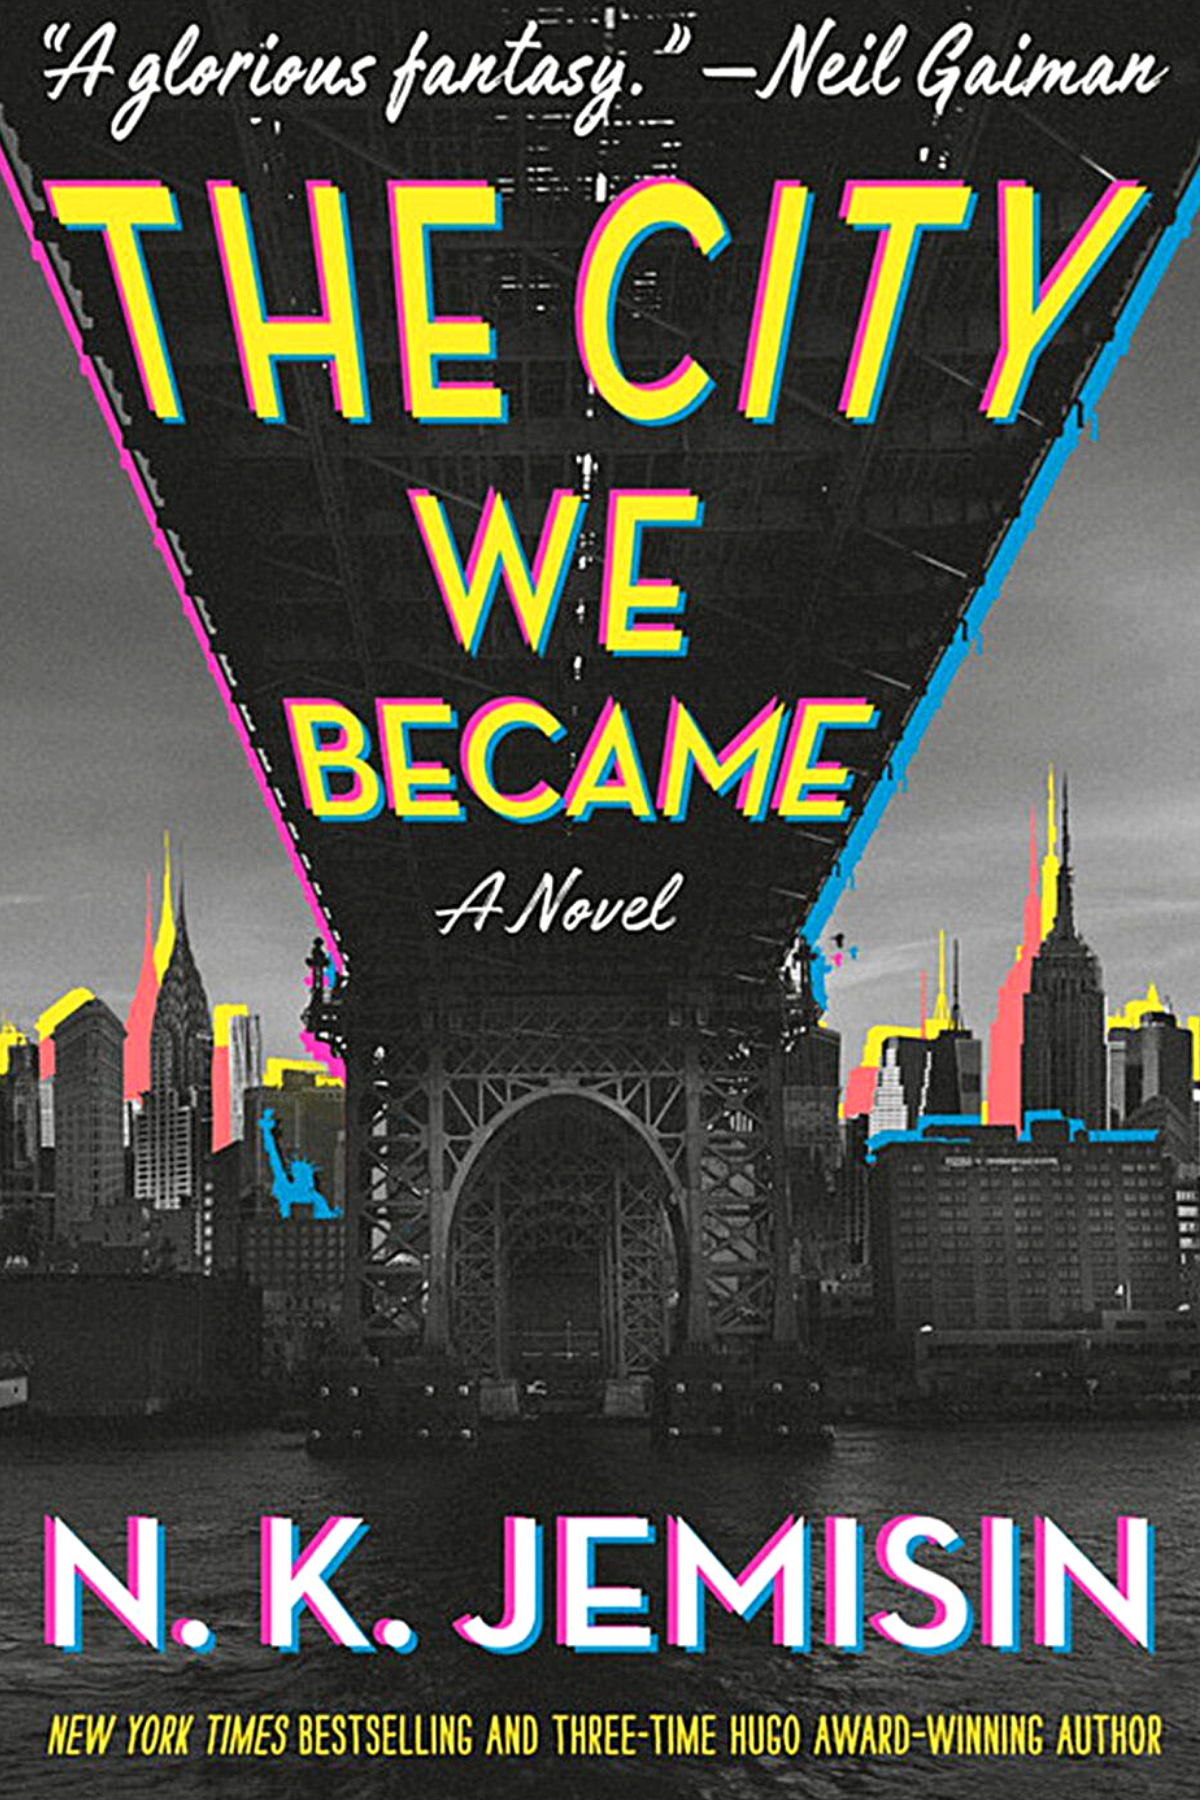 *SIGNED* The City We Became by N. K. Jemisin